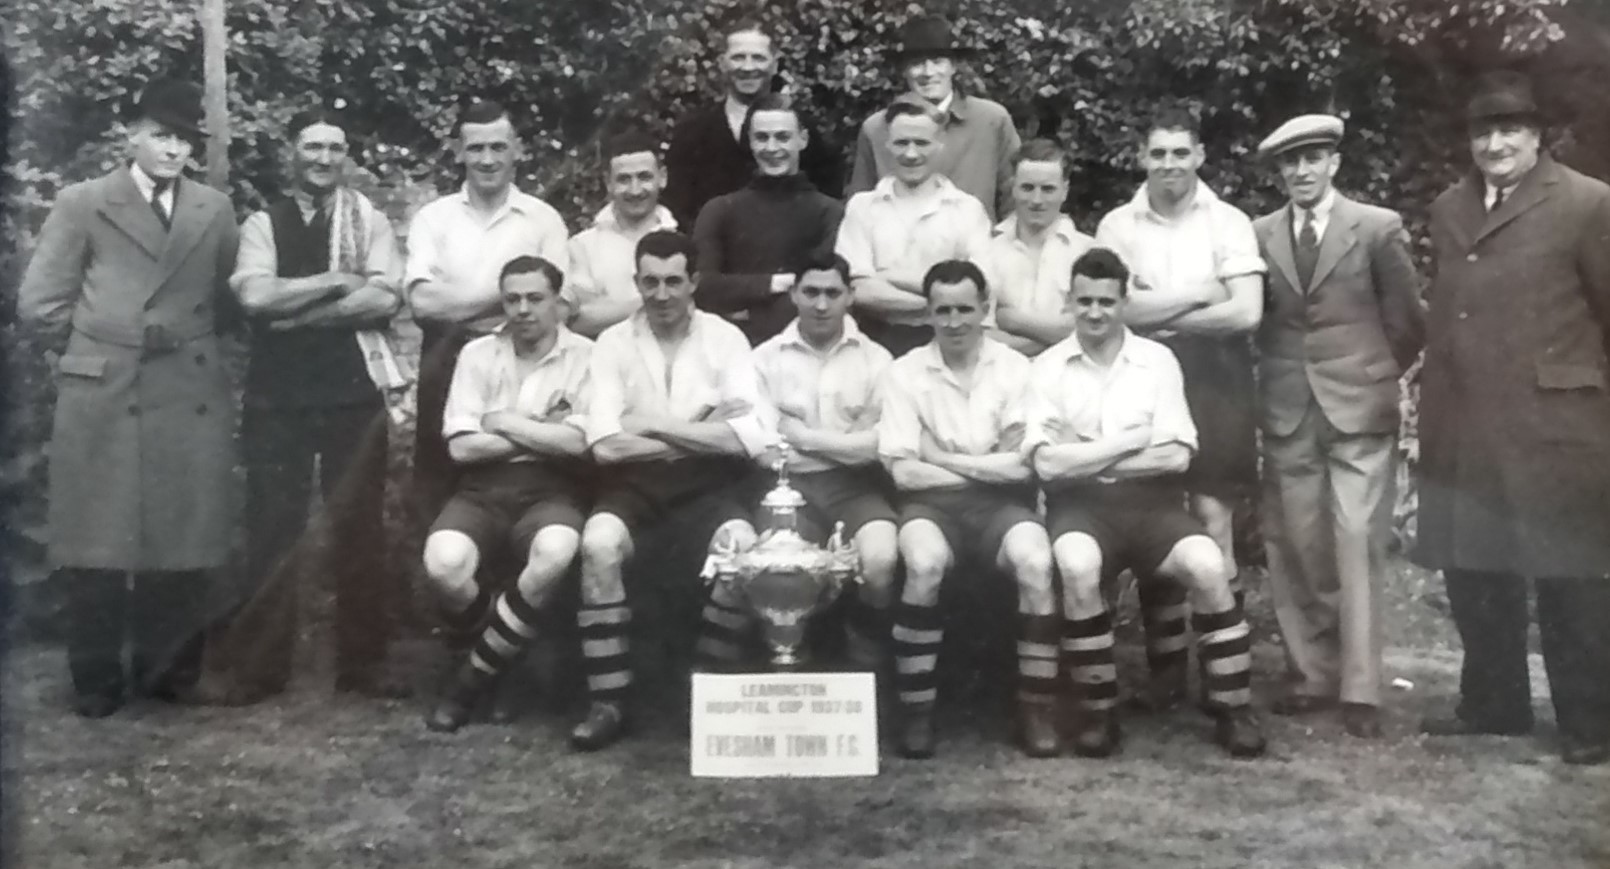 The Evesham Town FC line-up with the Leamington Hospital Cup, which they won the in the 1937-38 season 